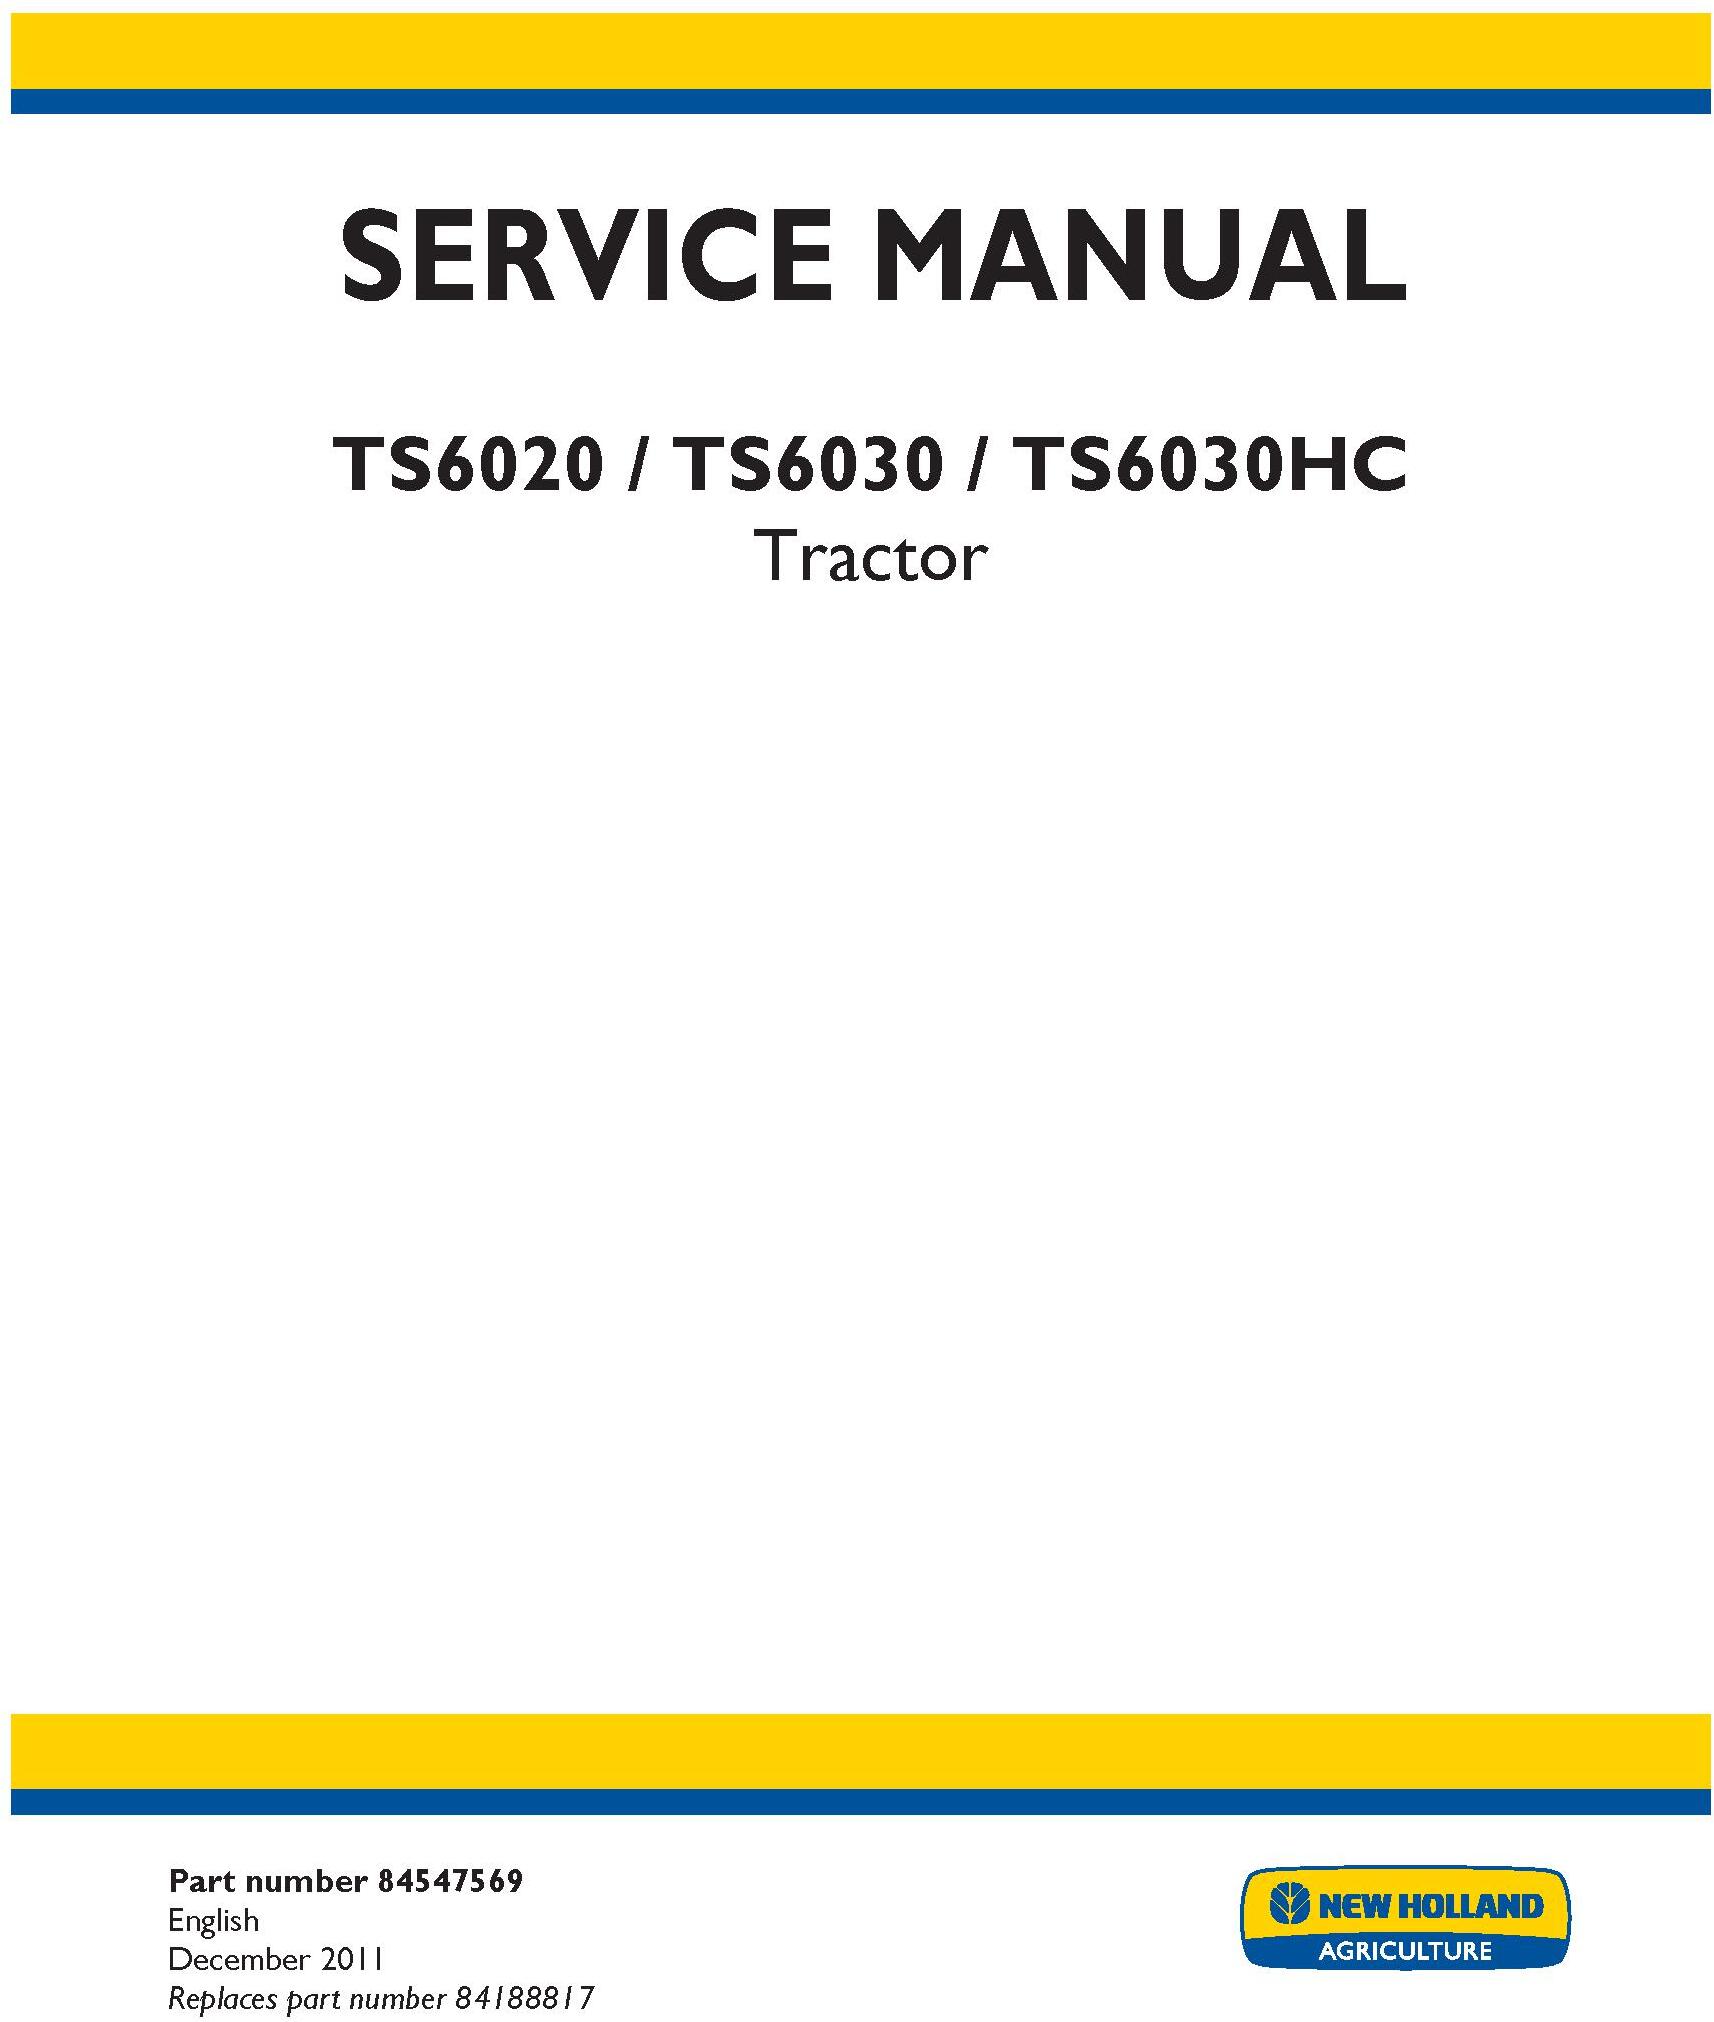 New Holland TS6020, TS6030, TS6030HC Tractor Complete Service Manual - 19579